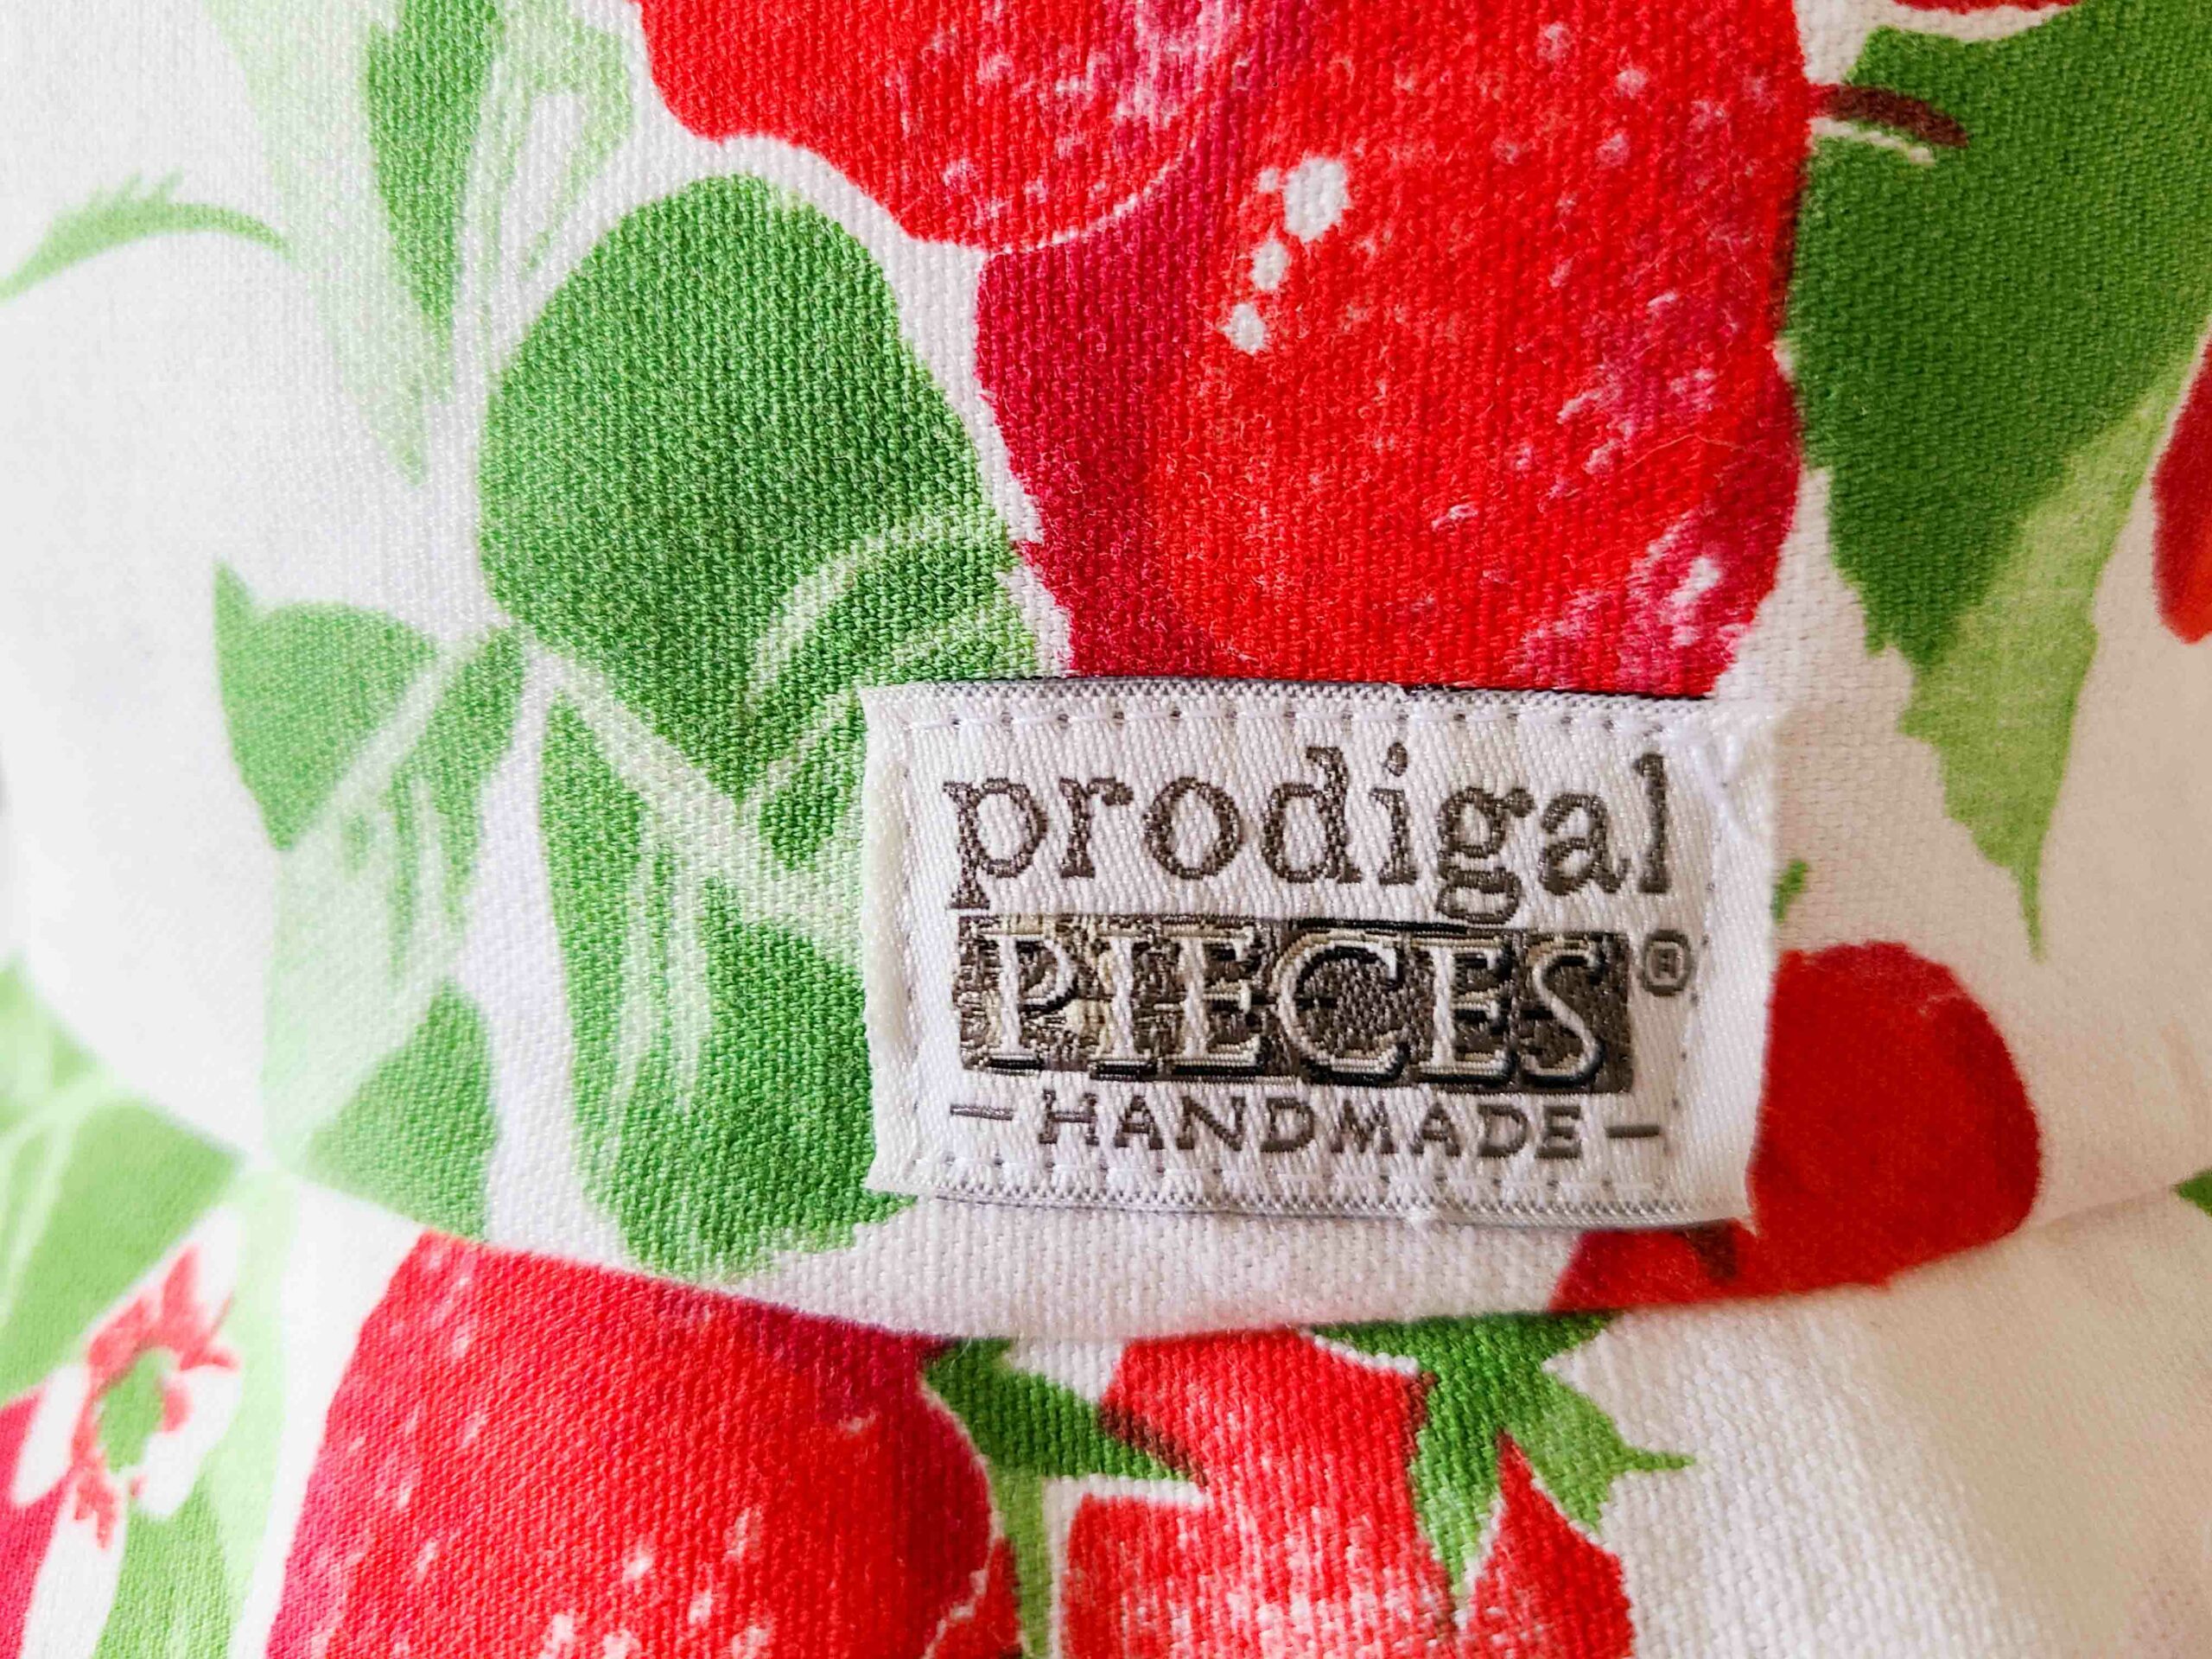 Prodigal Pieces Handmade DIY Bucket Hat from Upcycled Vintage Tablecloth | prodigalpieces.com #prodigalpieces